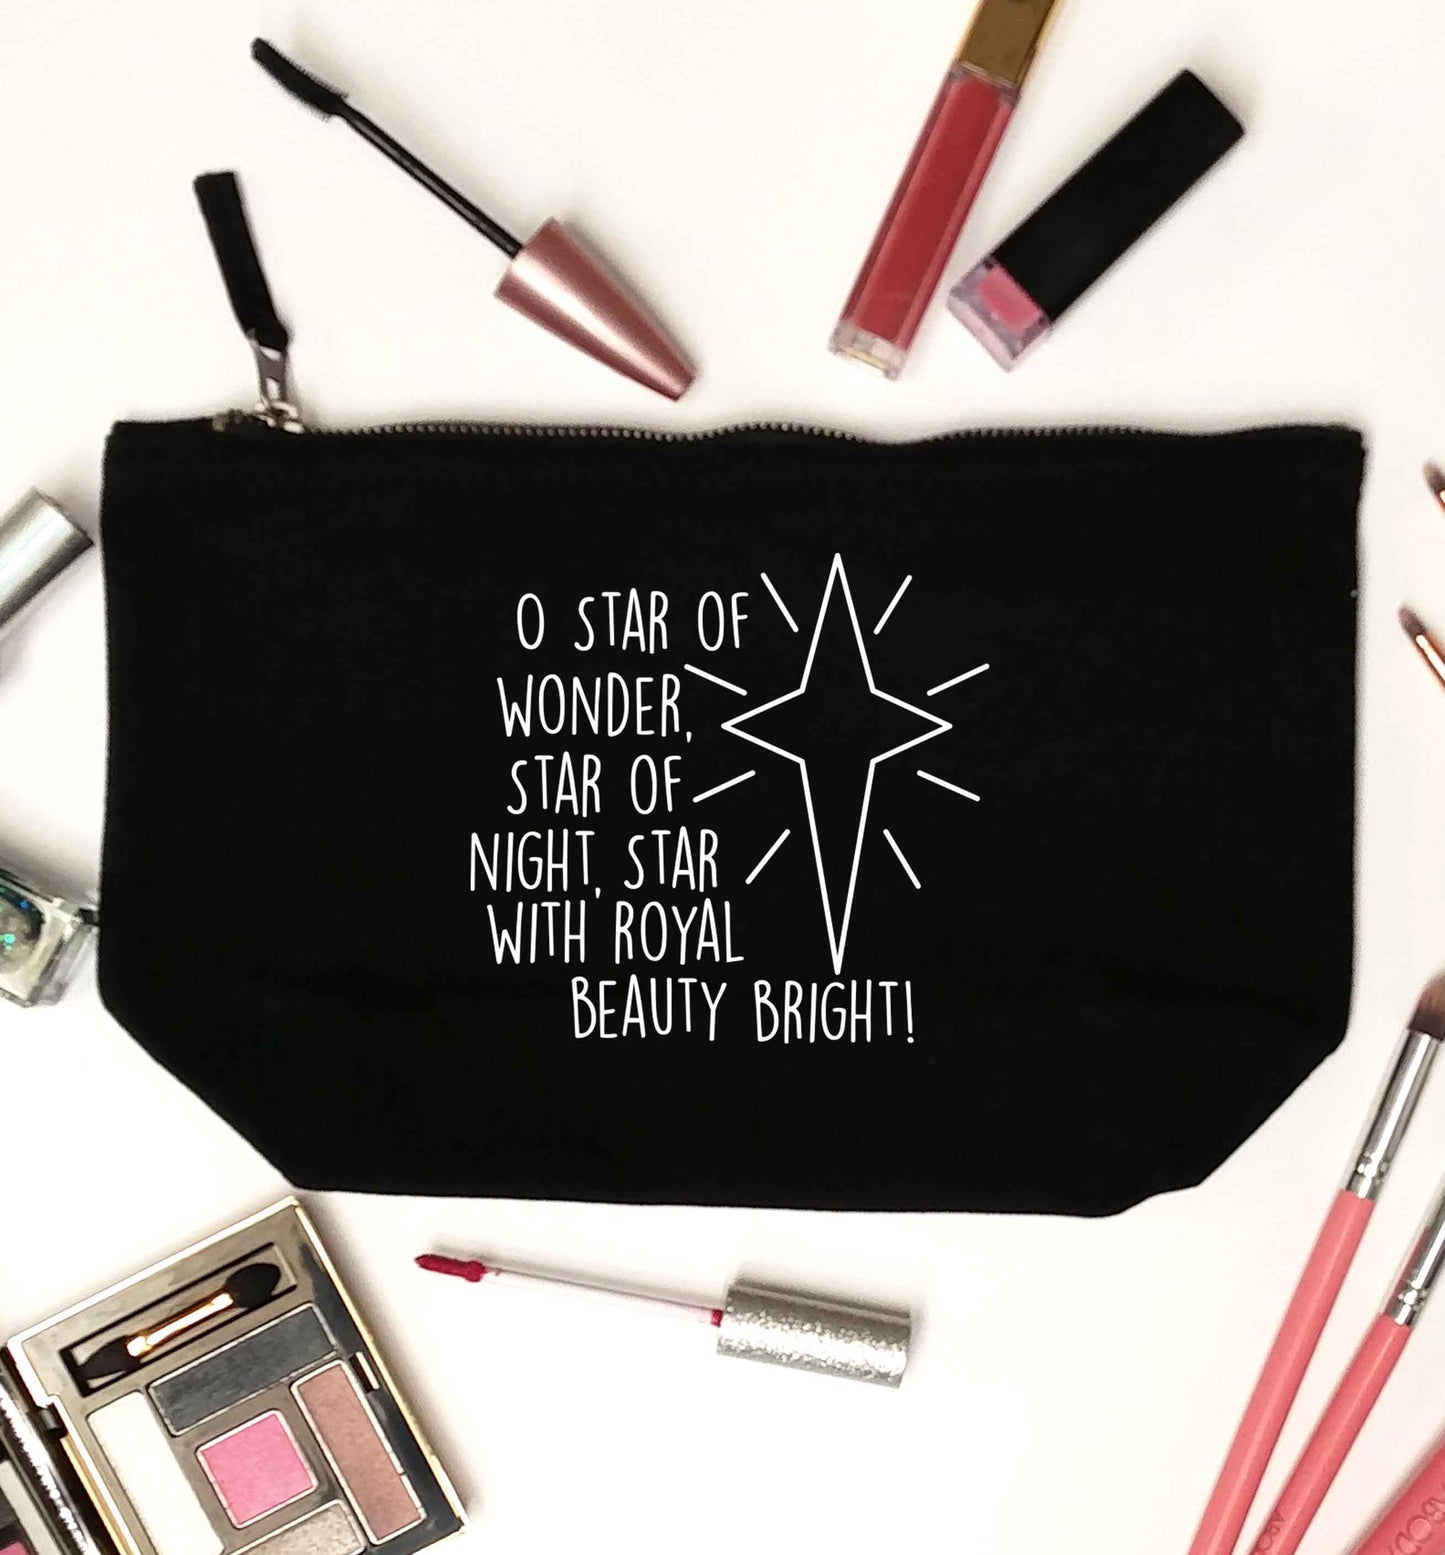 Oh star of wonder star of night, star with royal beauty bright black makeup bag